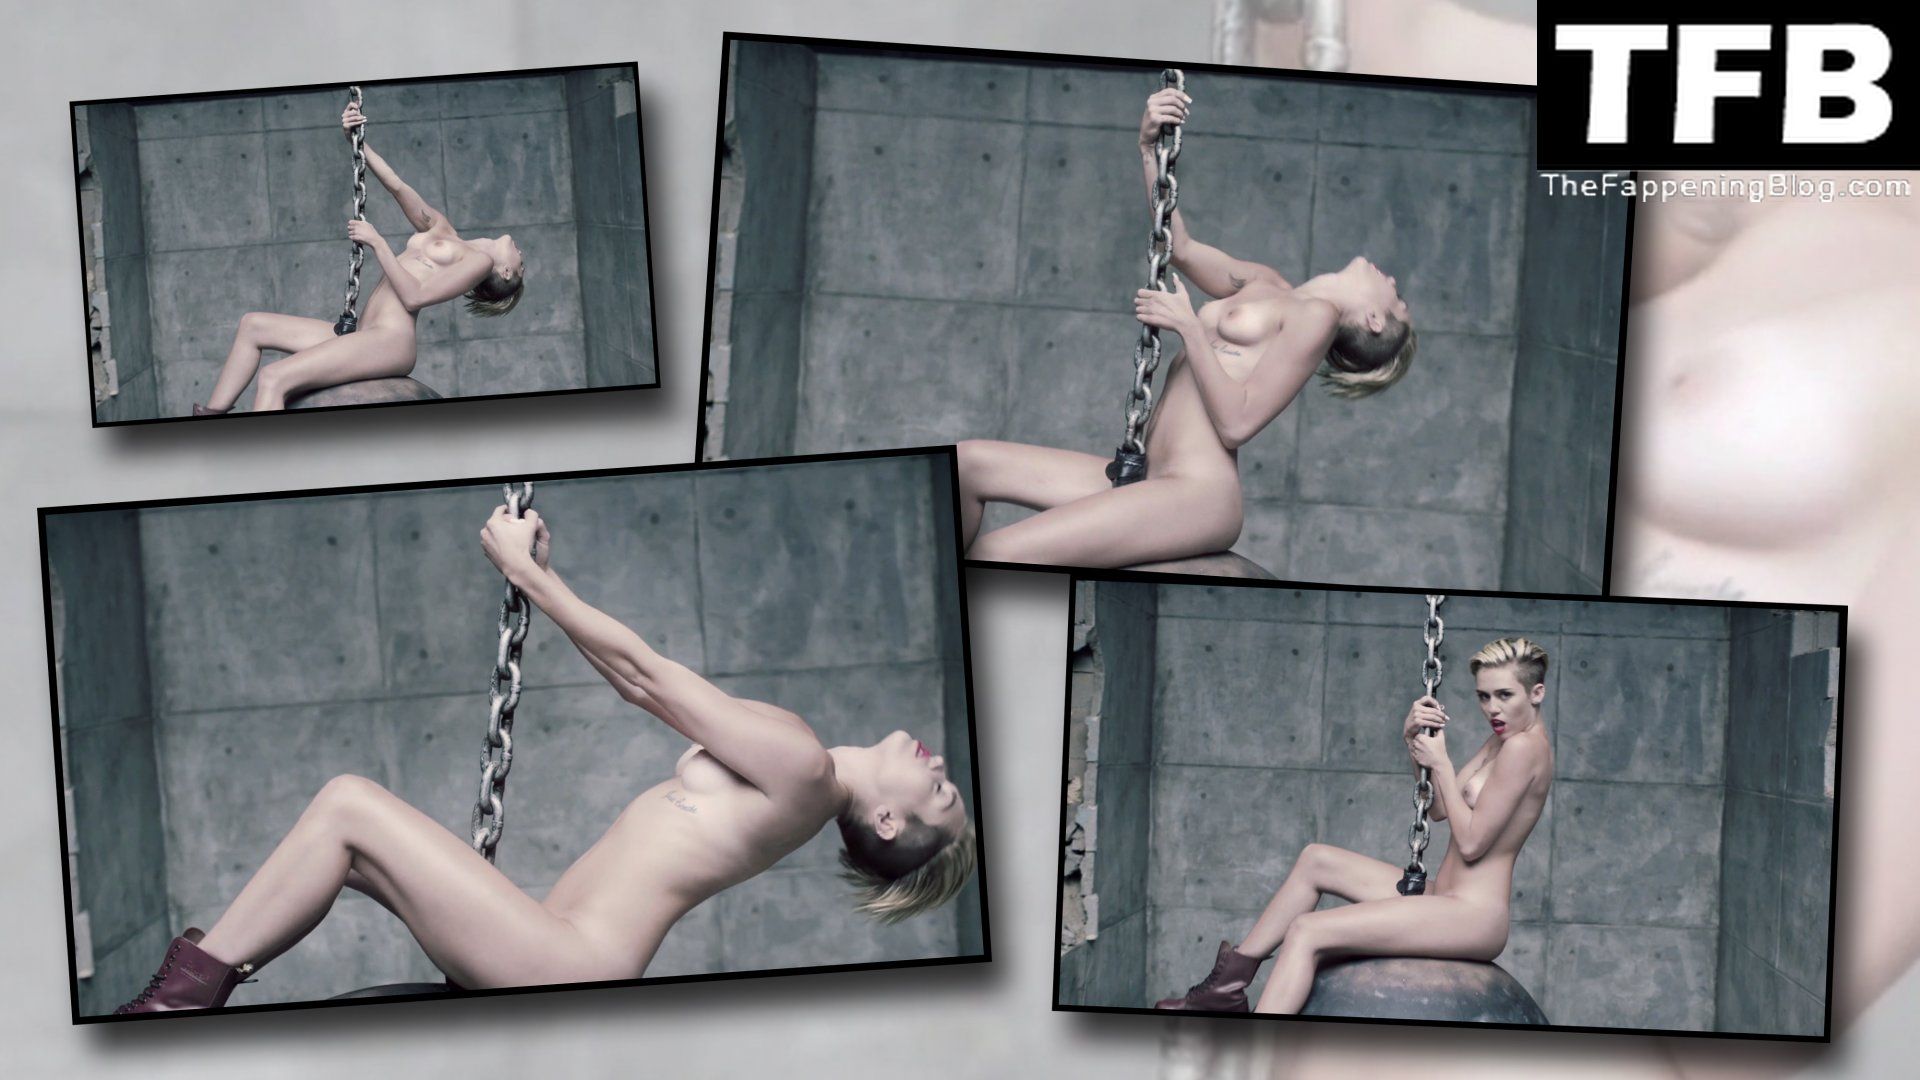 Miley Cyrus Nude – Wrecking Ball (17 Pics + Video)